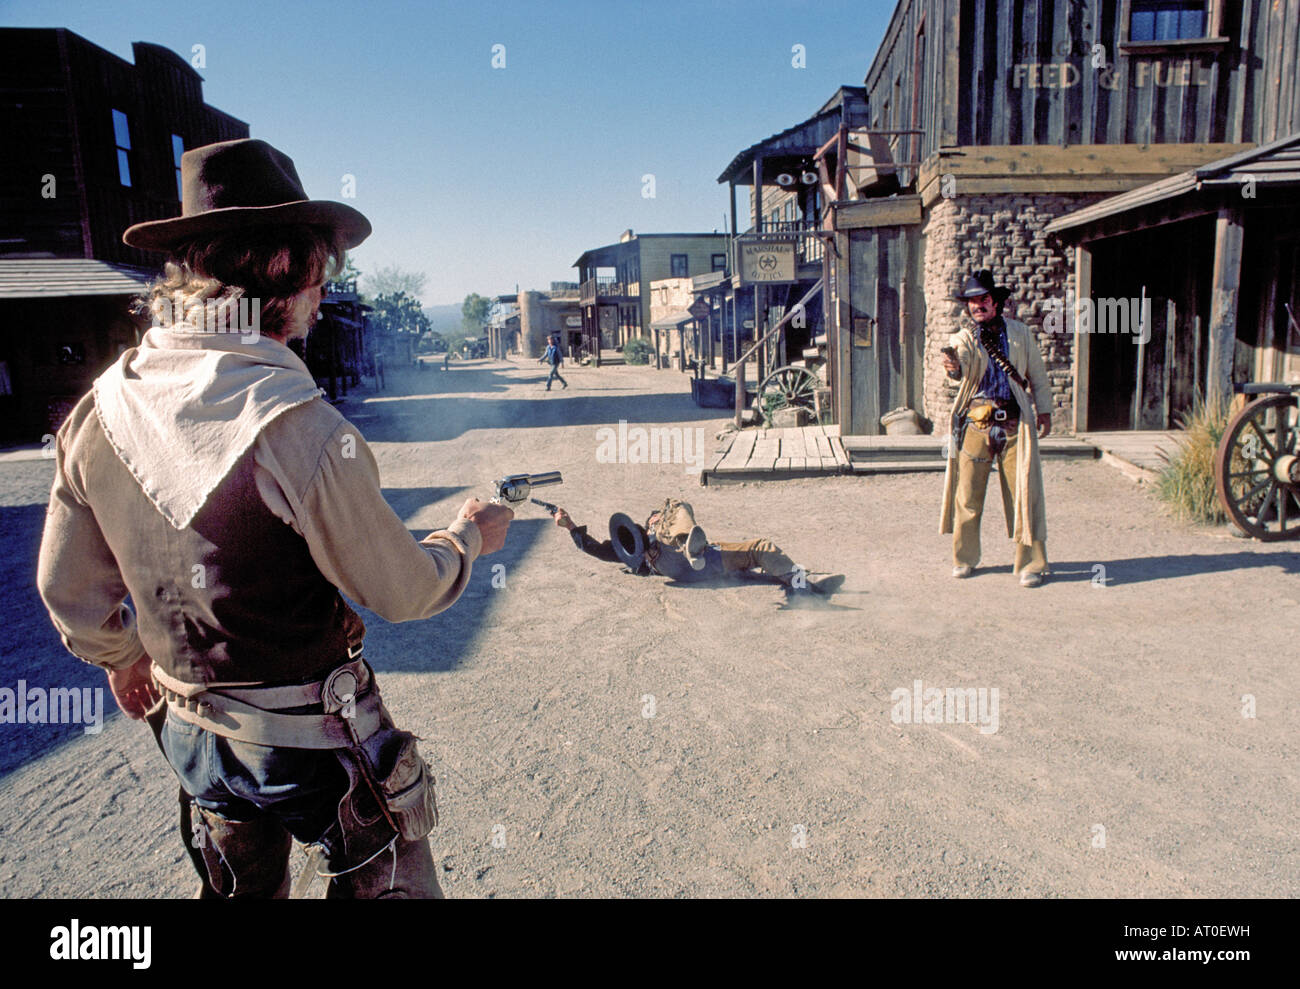 A mock gunfight in the streets of Old Tucson Studios and movie set in Tucson Arizona in the sonoran desert Stock Photo